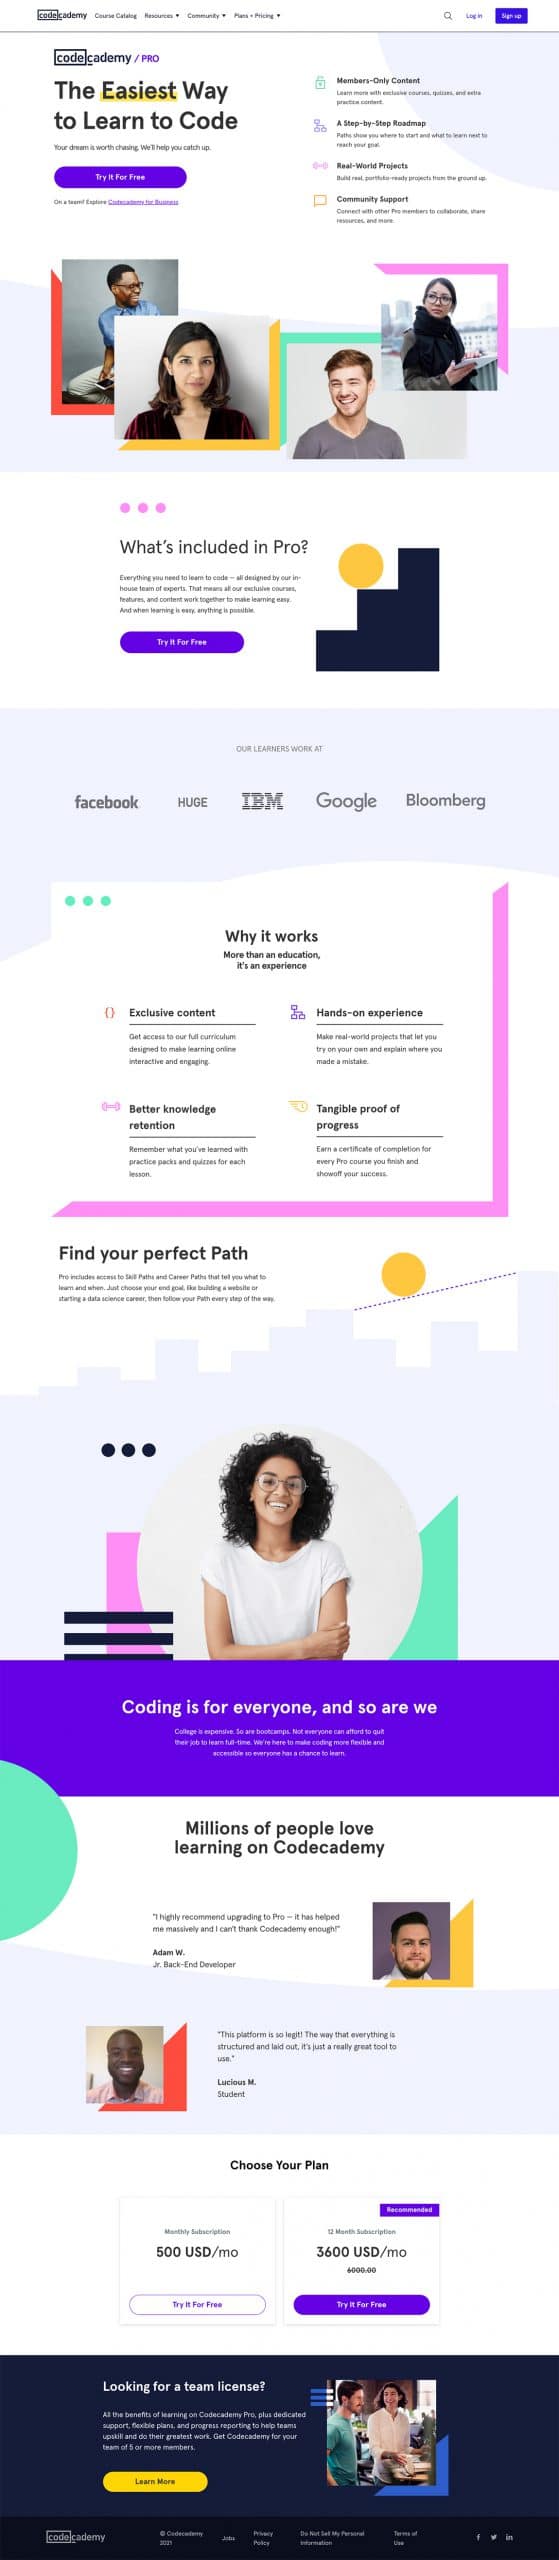 Codeacademy landing page, try it for free